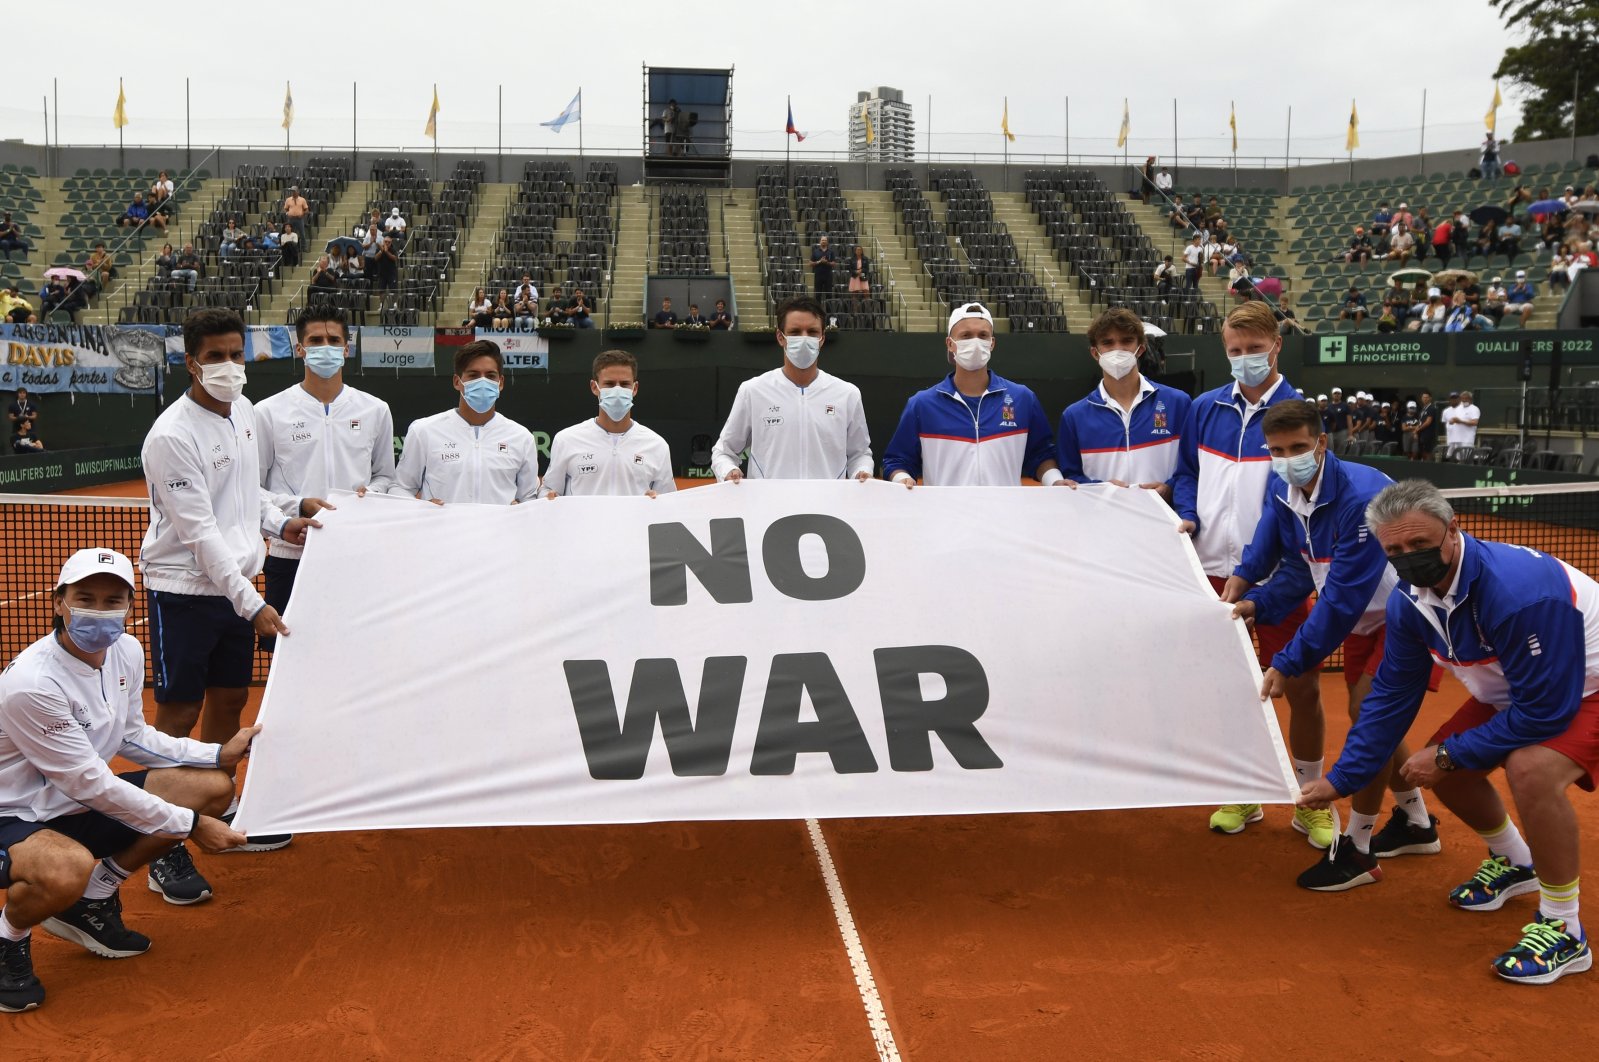 Argentina (L) and Czech players hold an anti-war banner before a Davis Cup match, Buenos Aires, Argentina, March 4, 2022. (AP Photo)